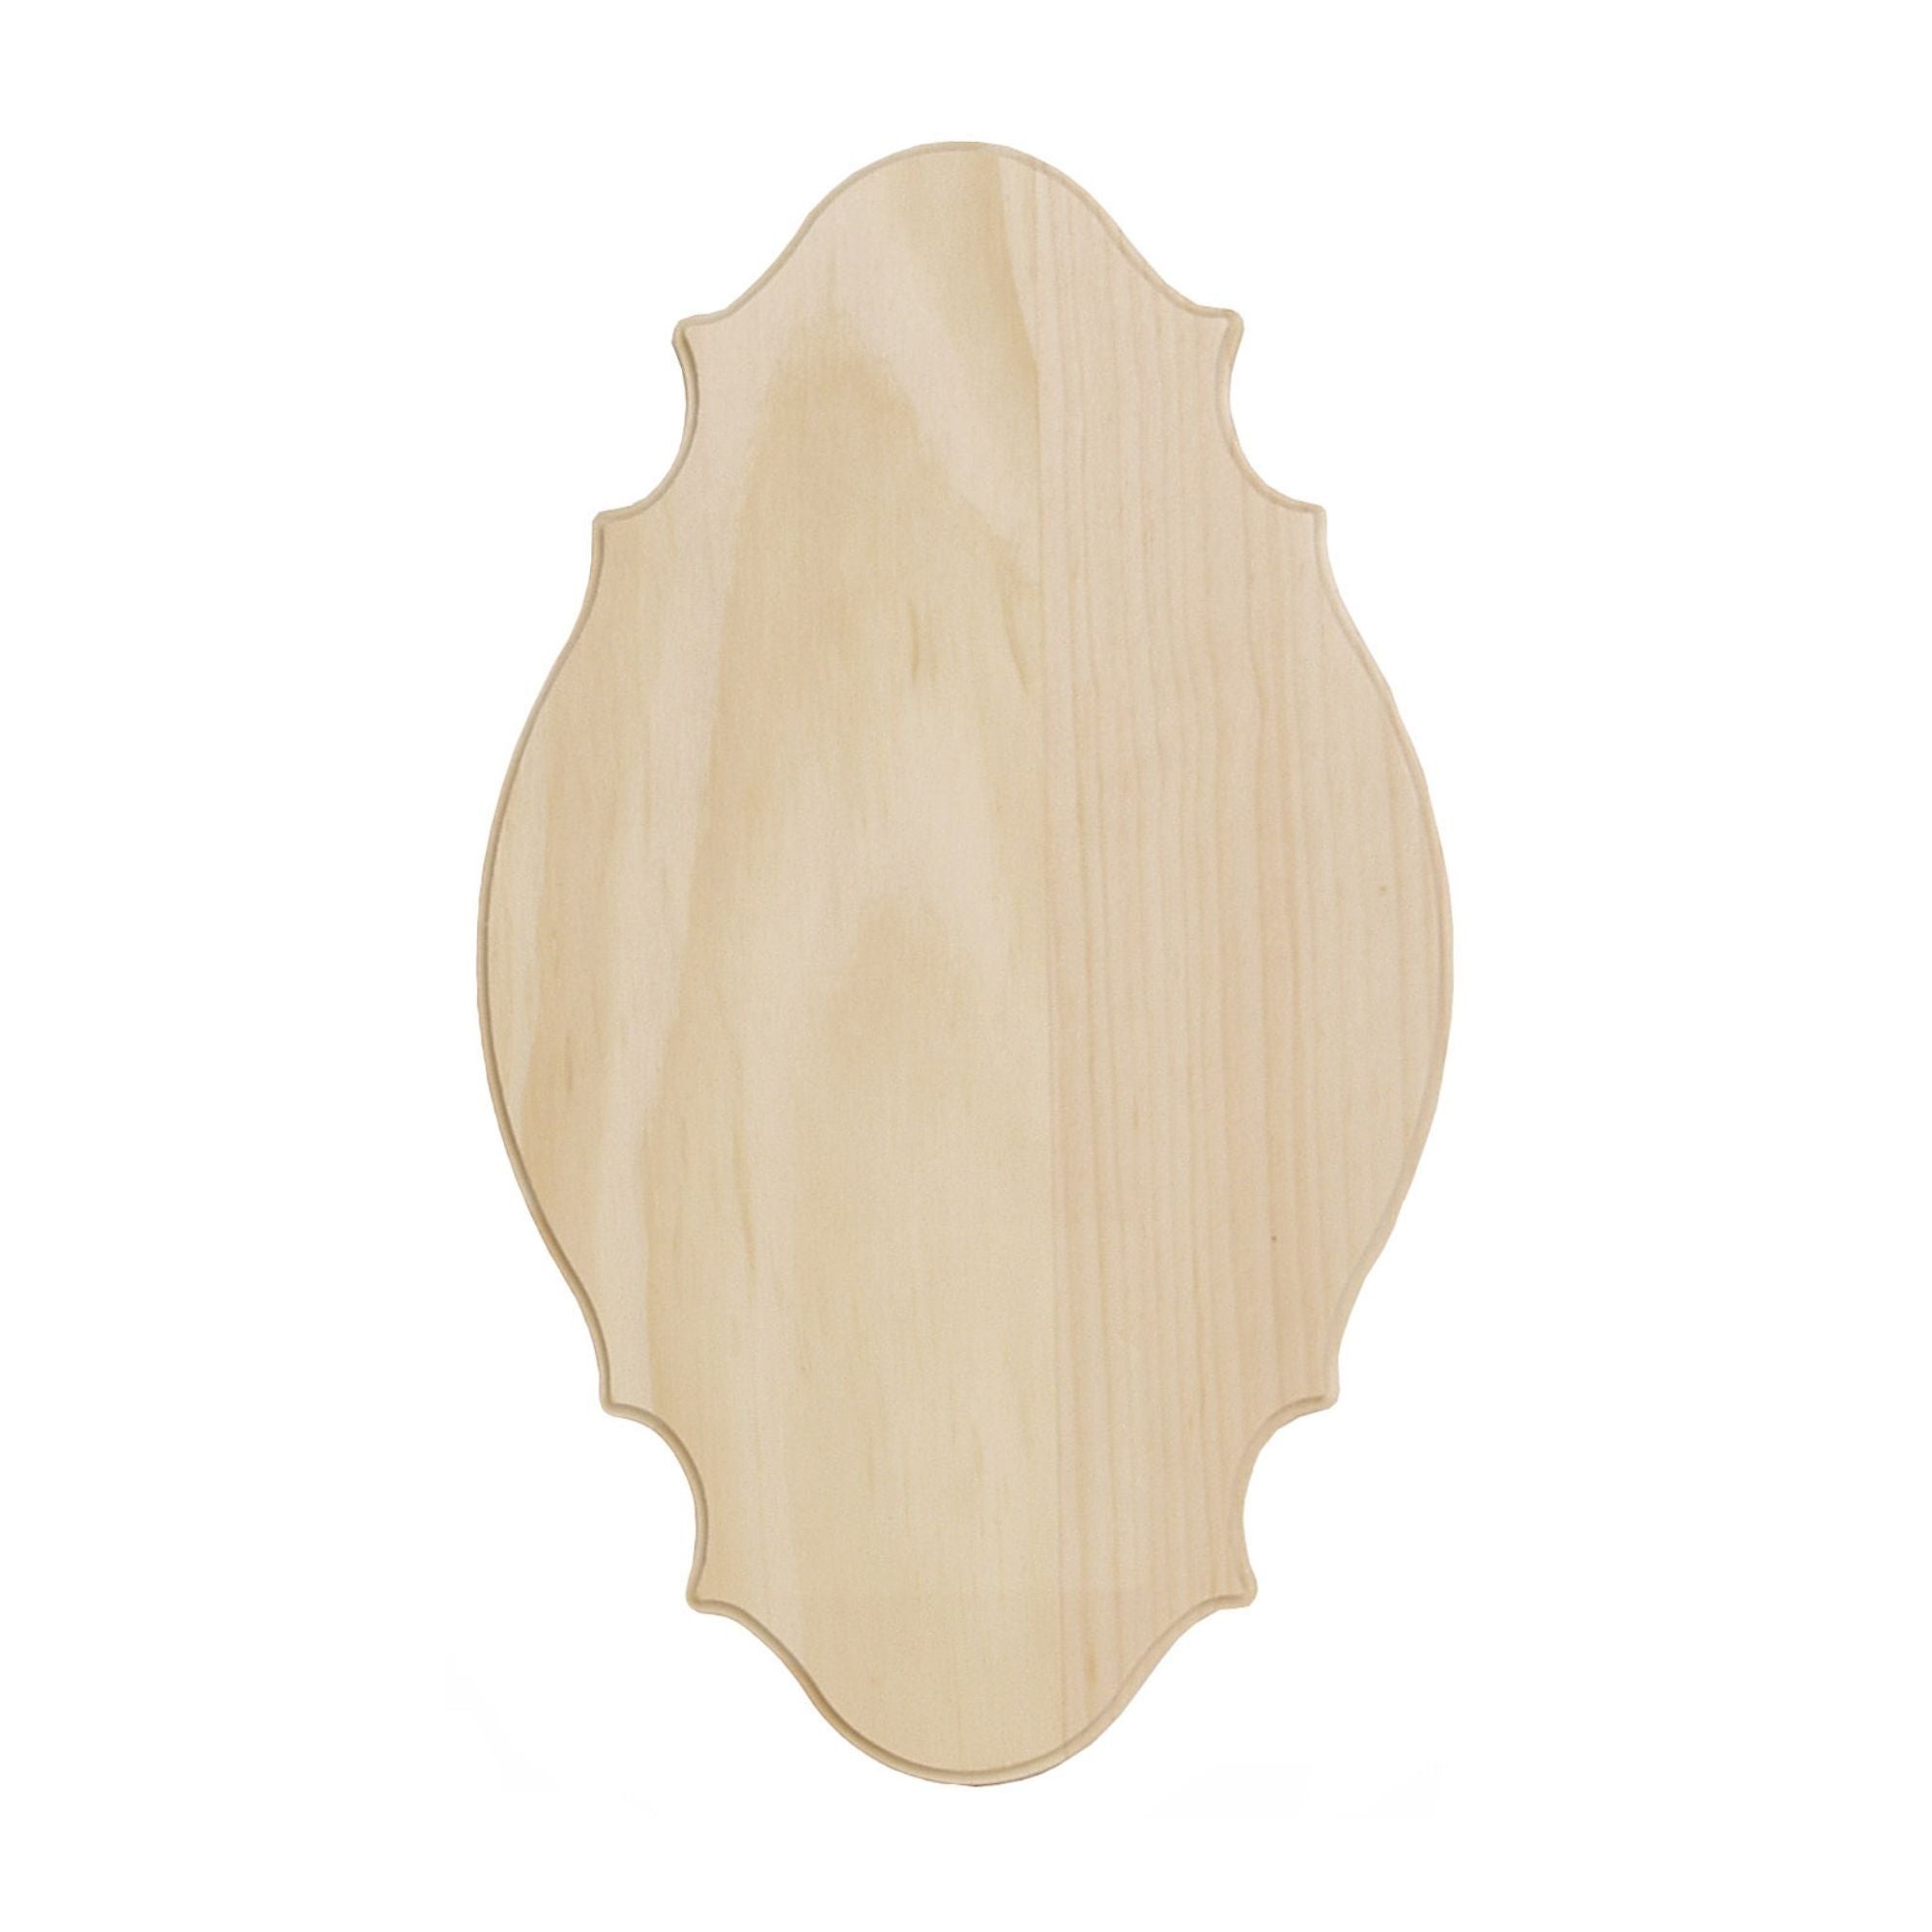 Walnut Hollow Wide-Edge French Corner Basswood Plaque, 8 in. x 10